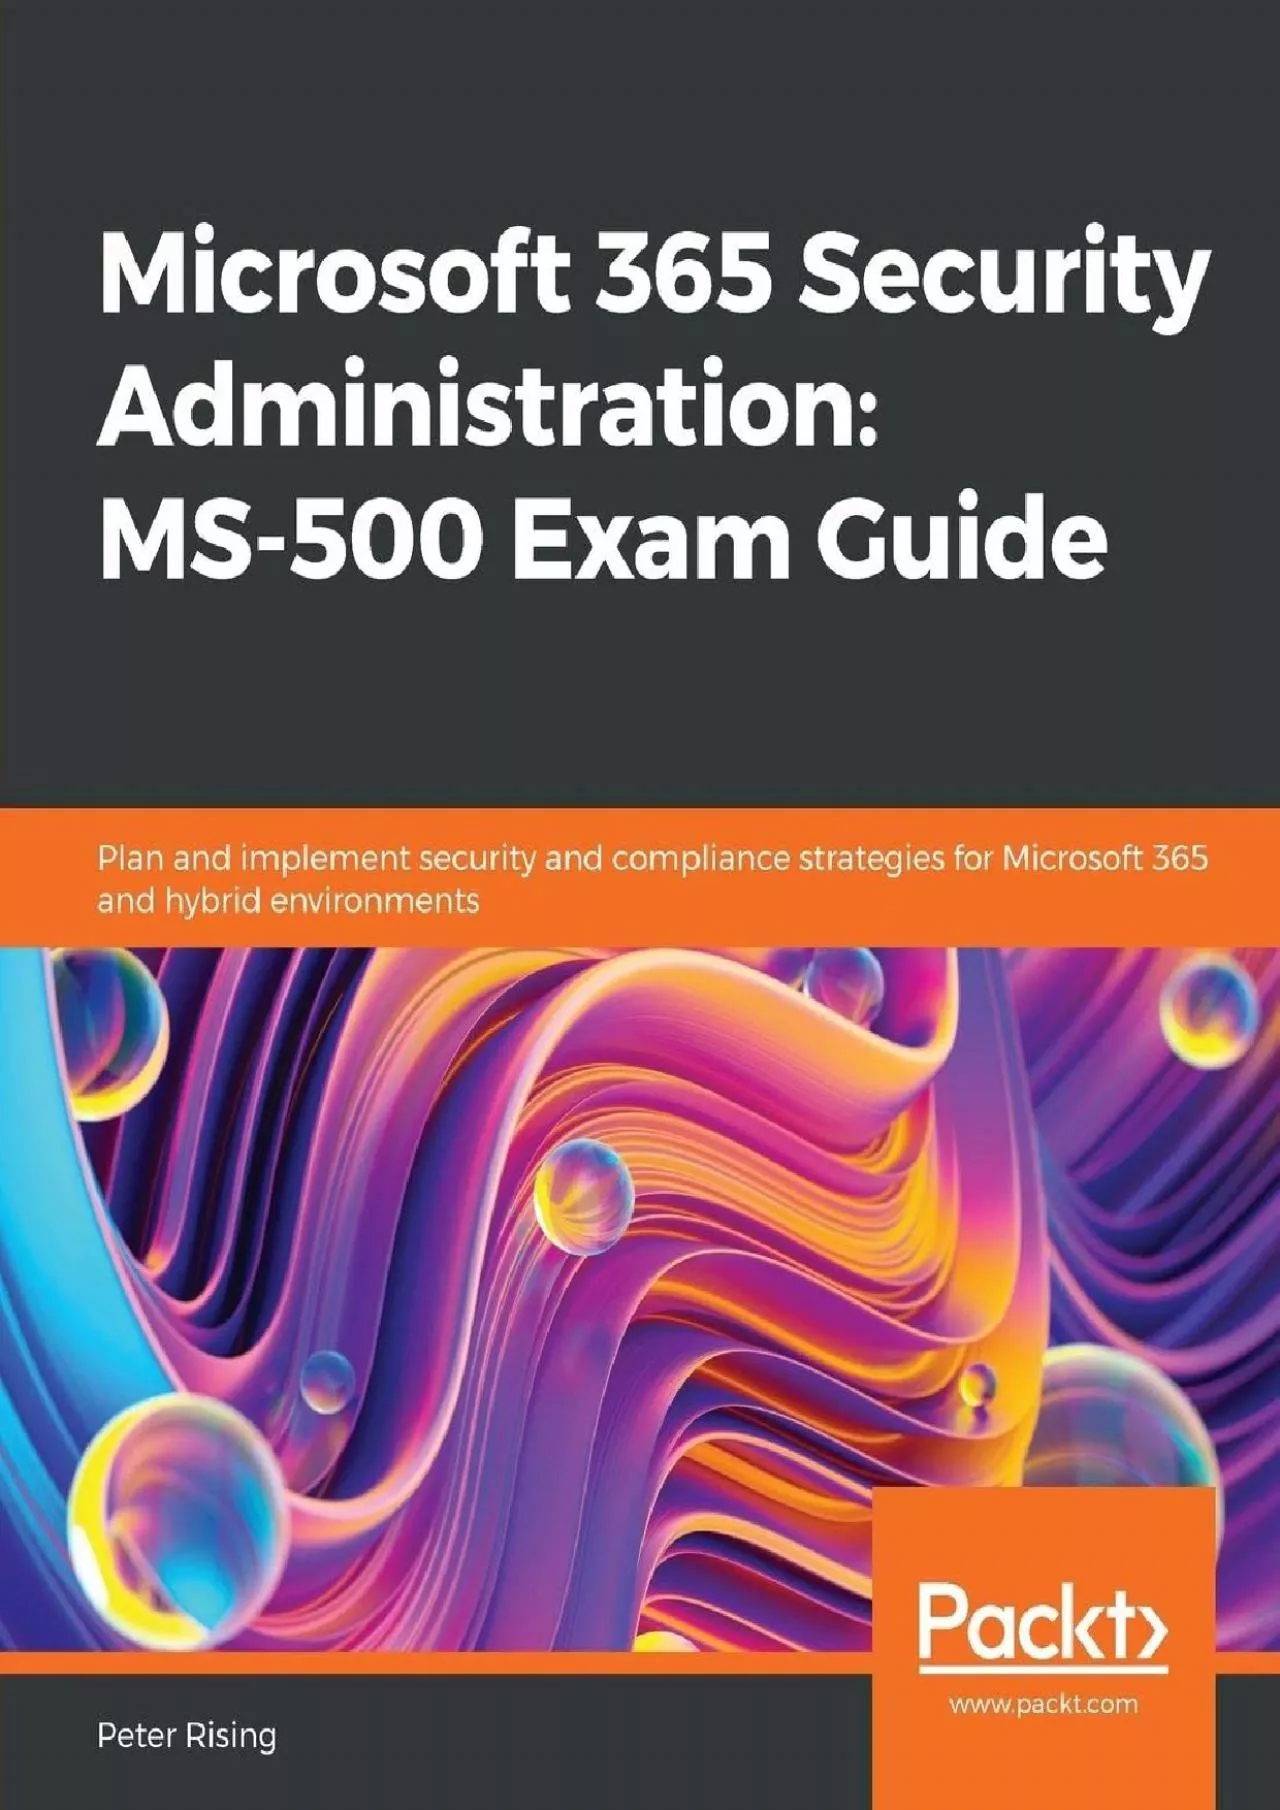 [PDF]-Microsoft 365 Security Administration: MS-500 Exam Guide: Plan and implement security